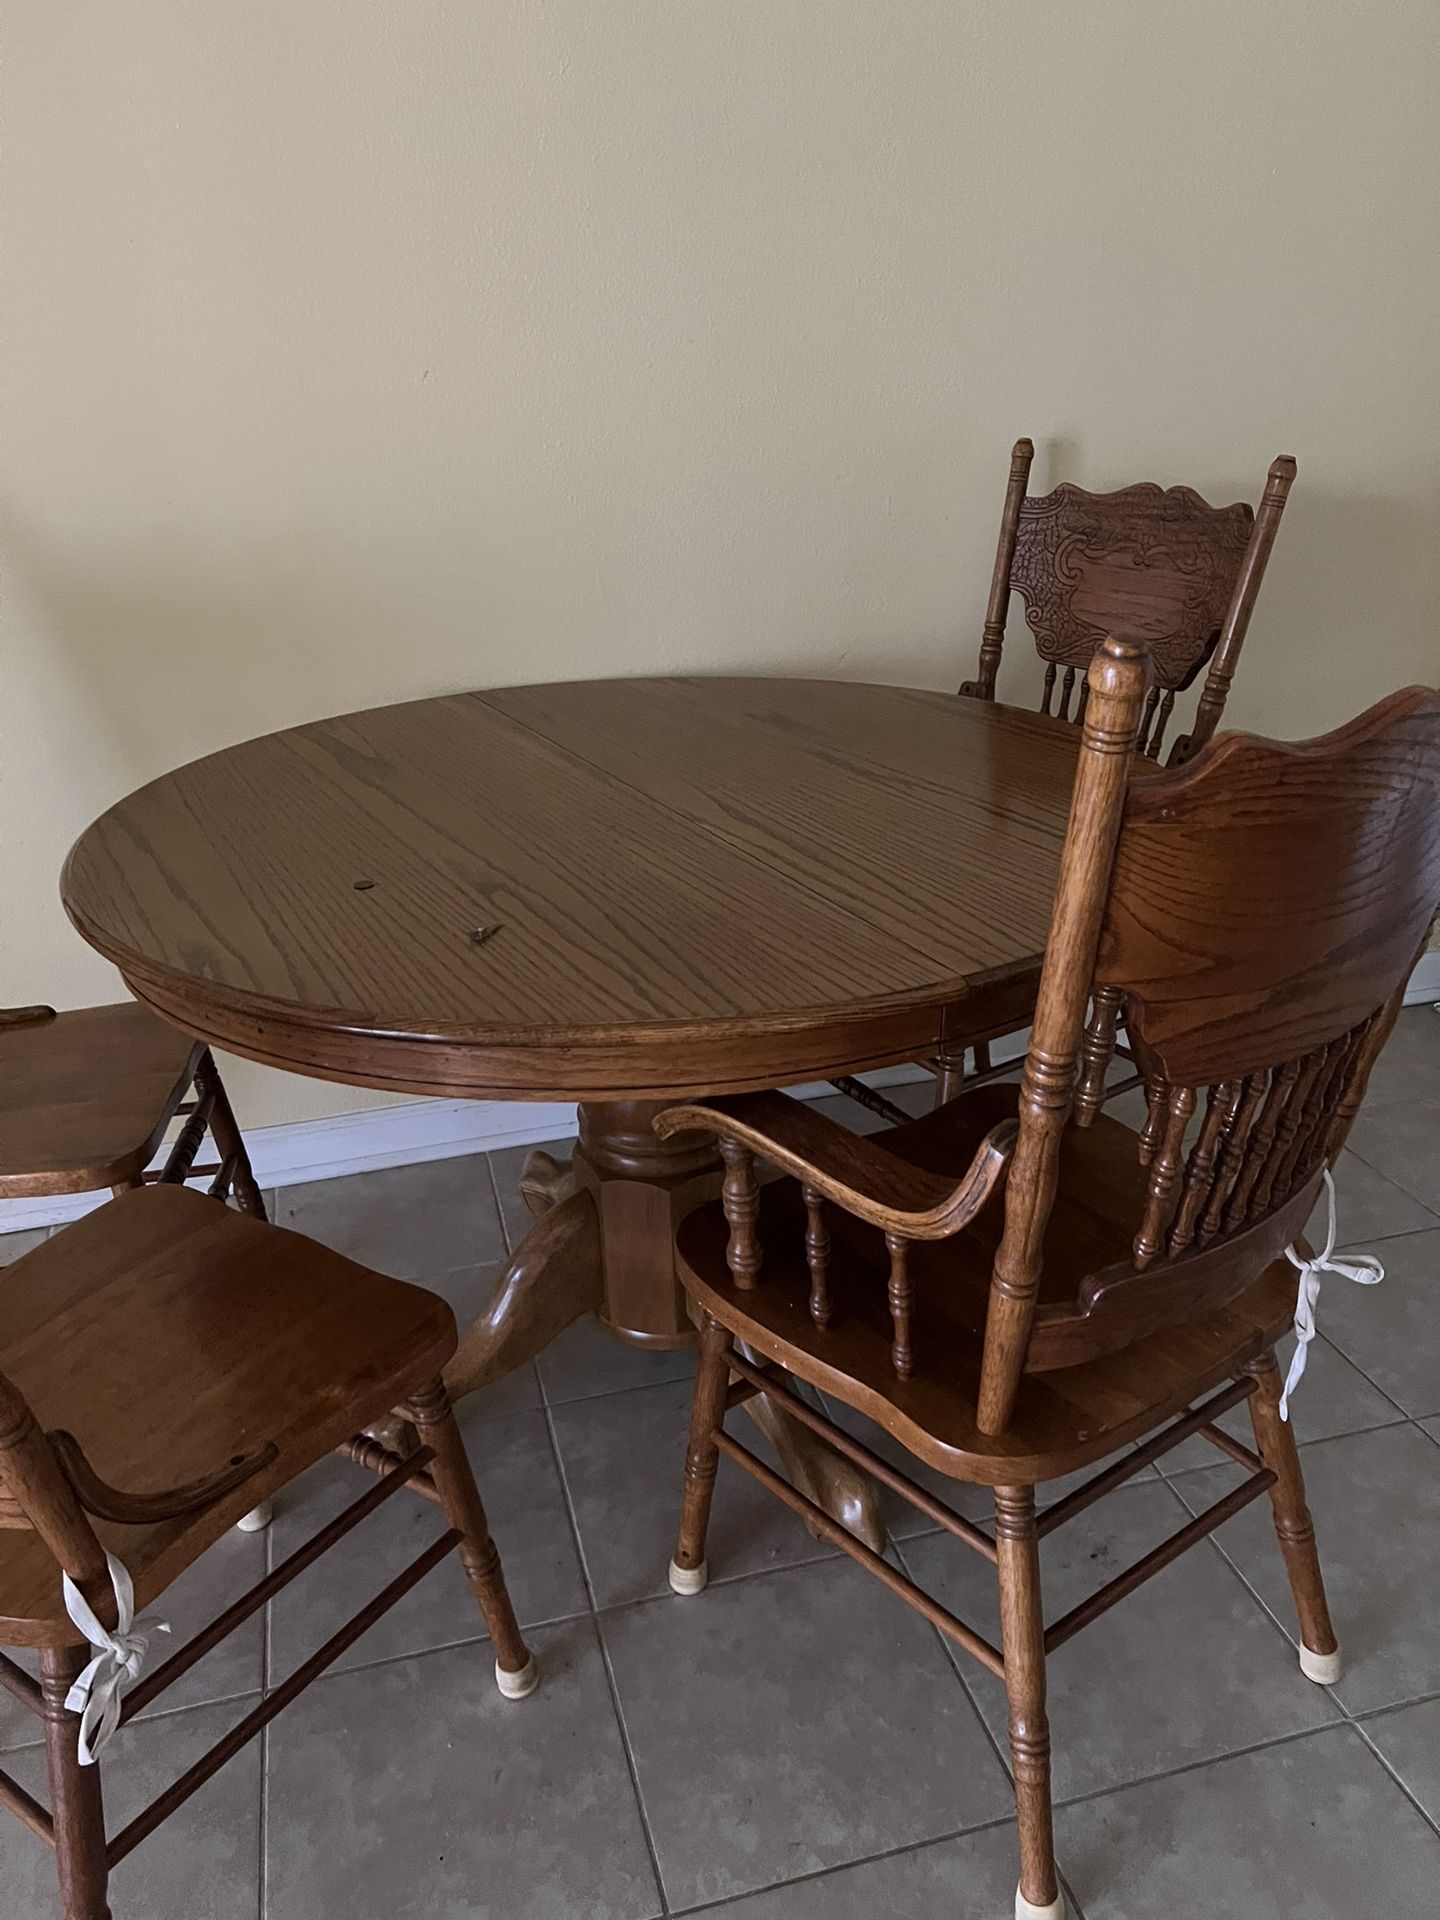 Breakfast Table With 4 Chaired For Sale.